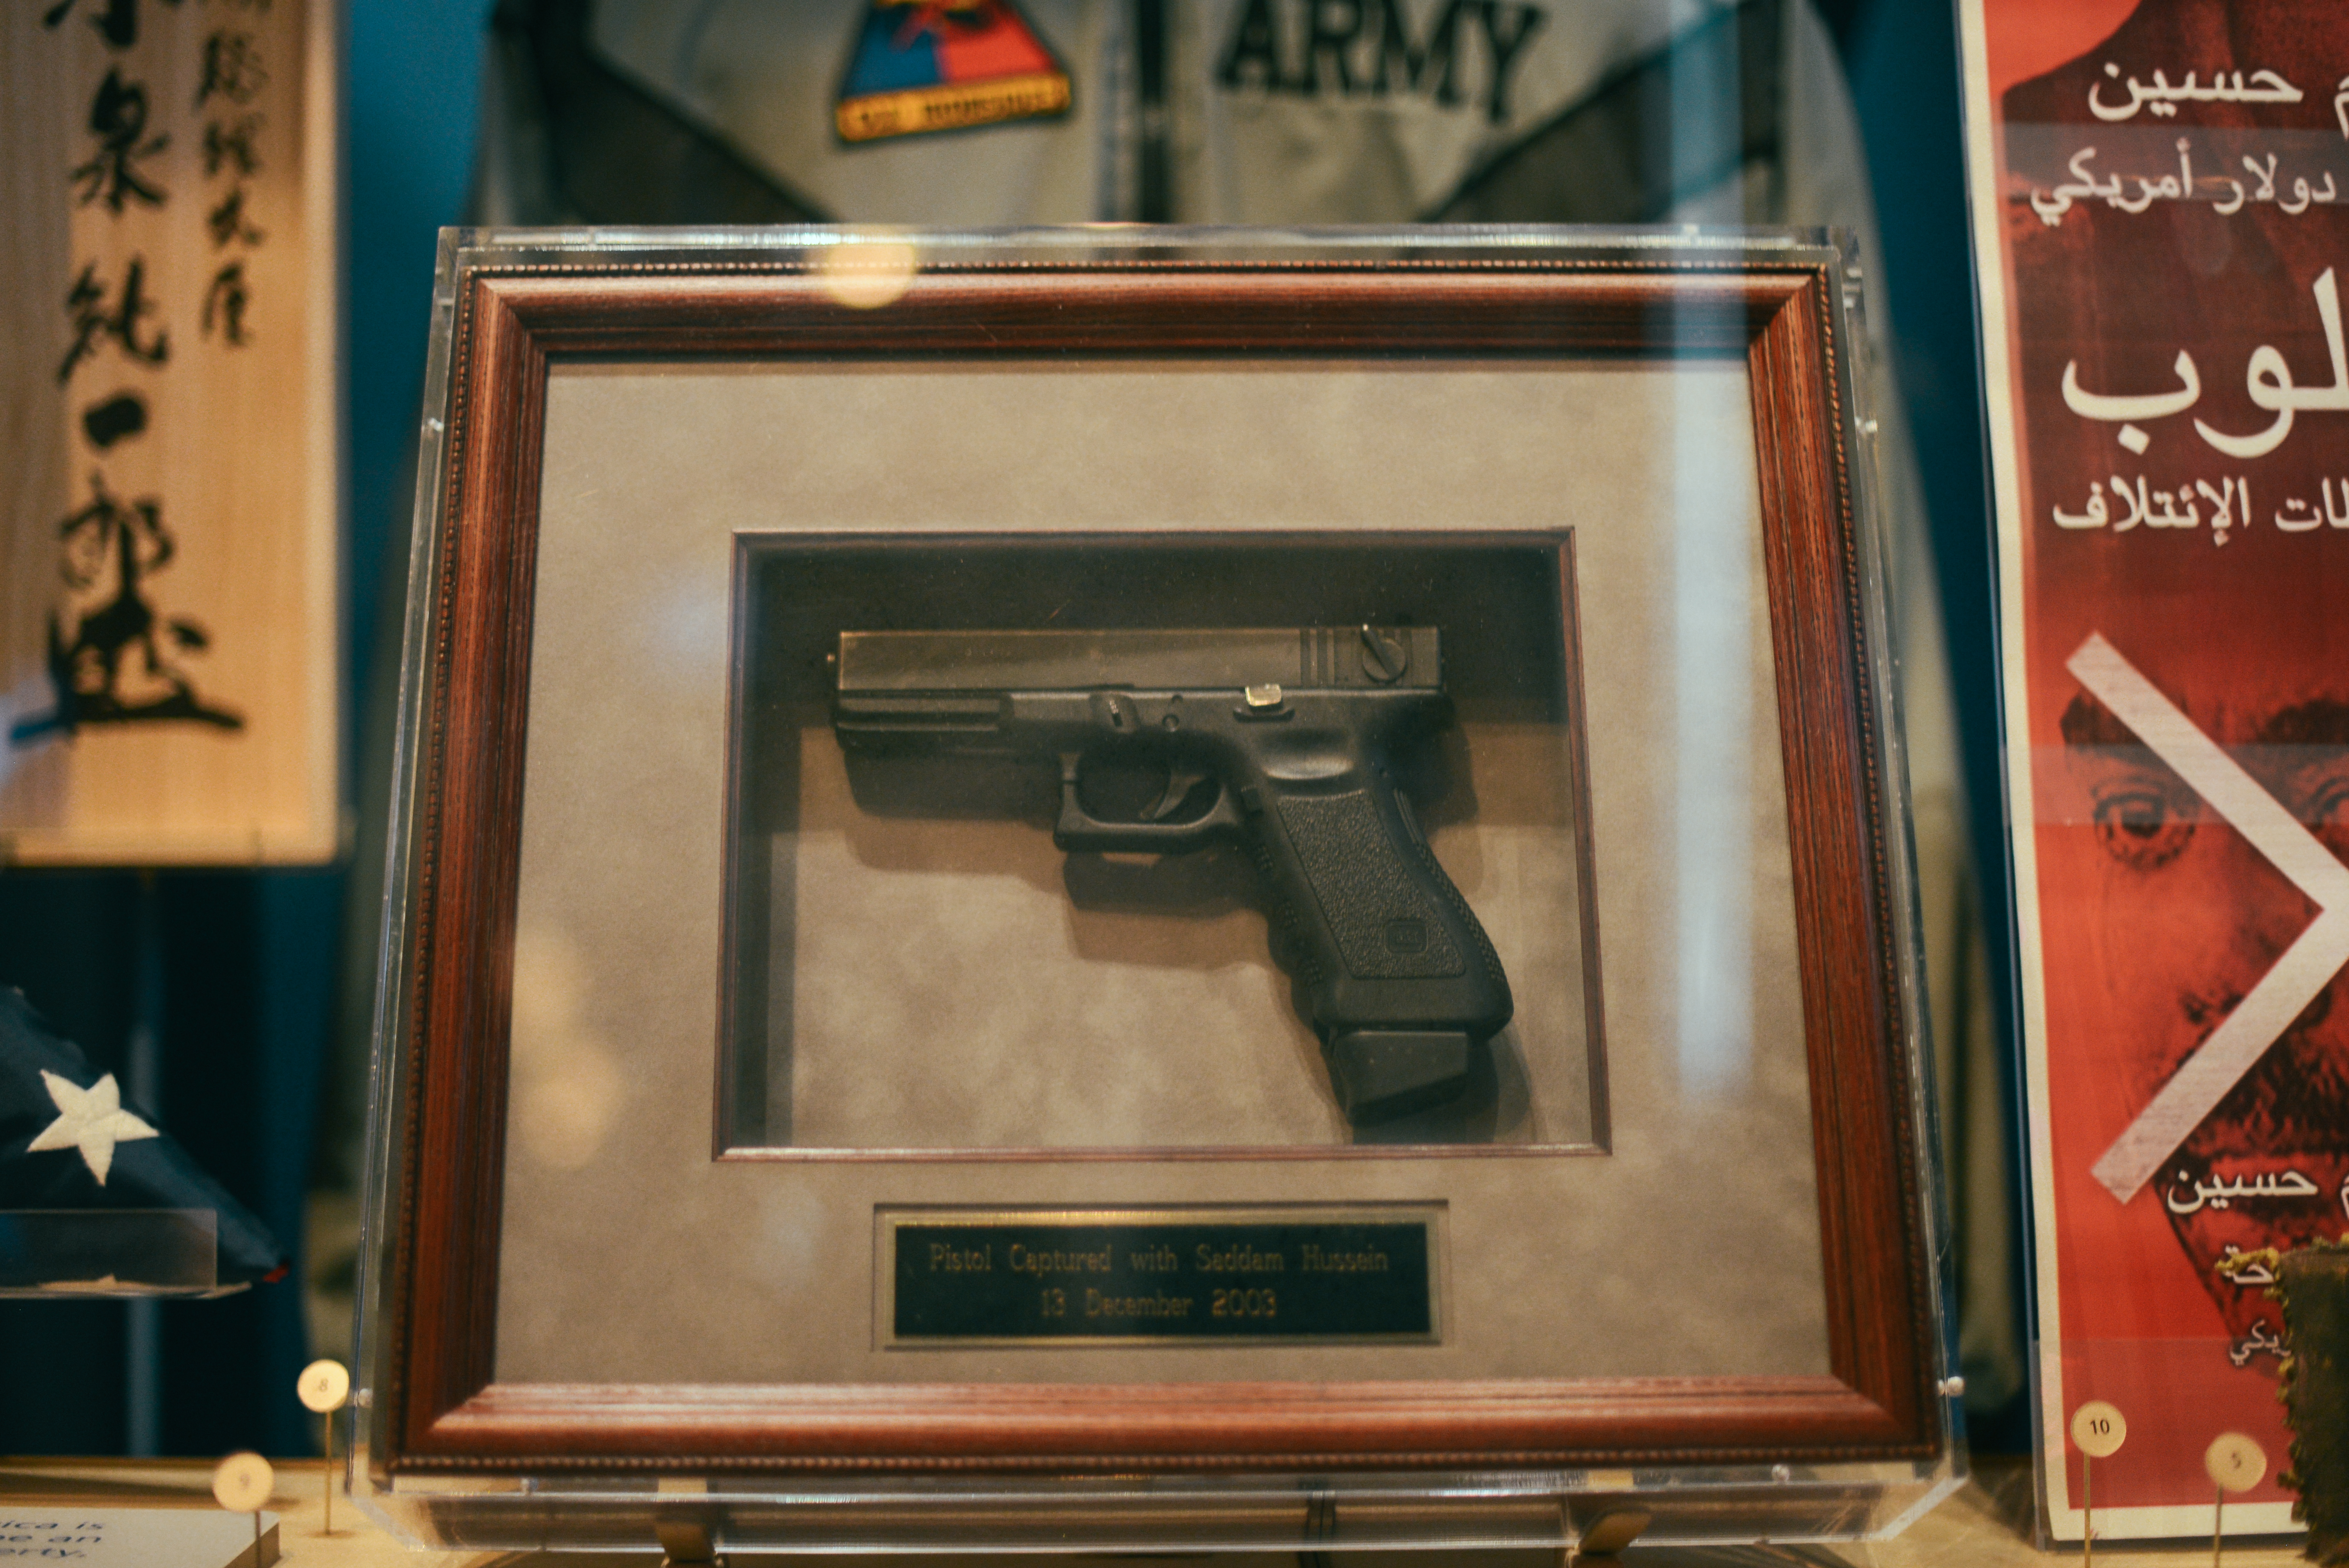 This 9mm Glock pistol was confiscated from Saddam Hussein when he was removed from the spider hole in Iraq. It is non-functional and was given to the President by the Military specialists who captured Saddam.